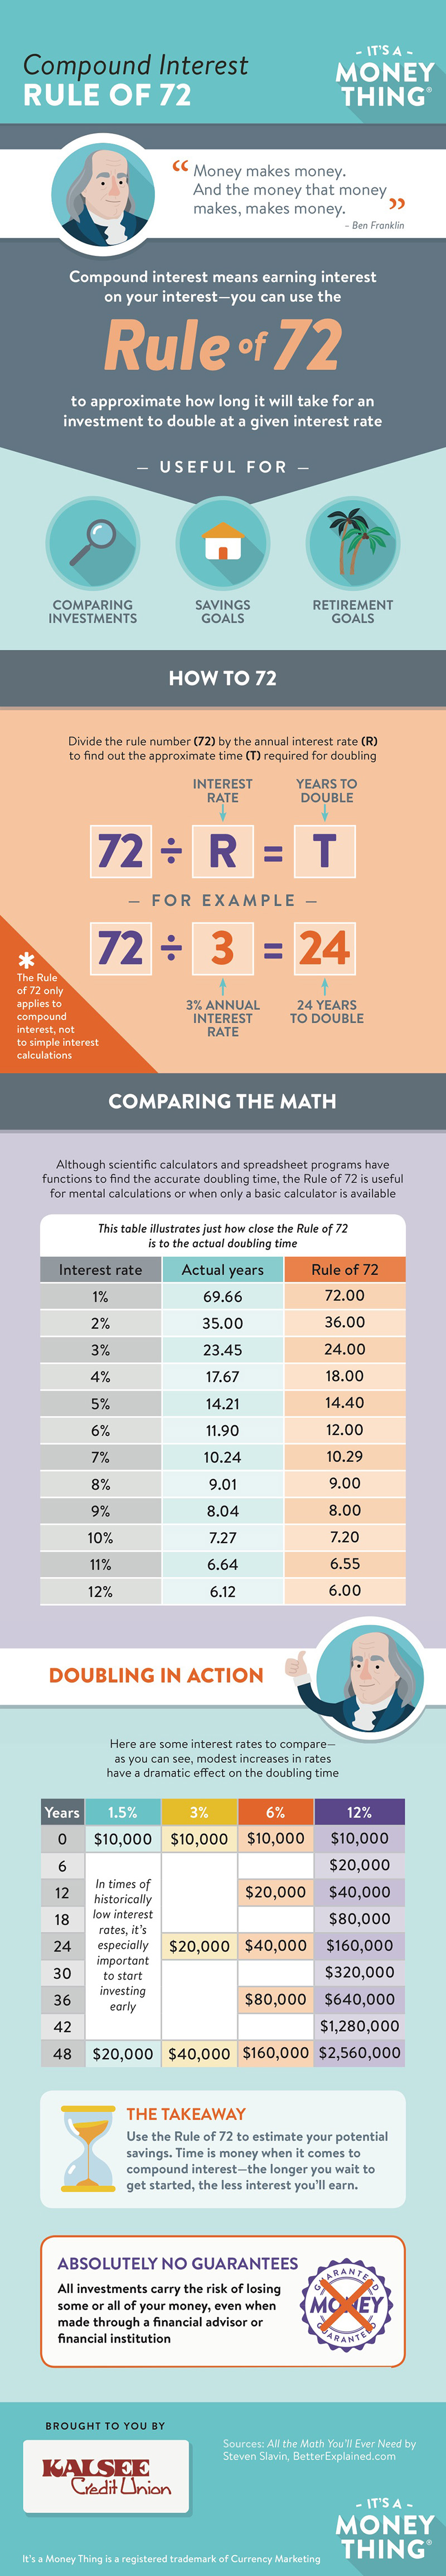 Compound Interest Rule of 72 infographic, click for transcription